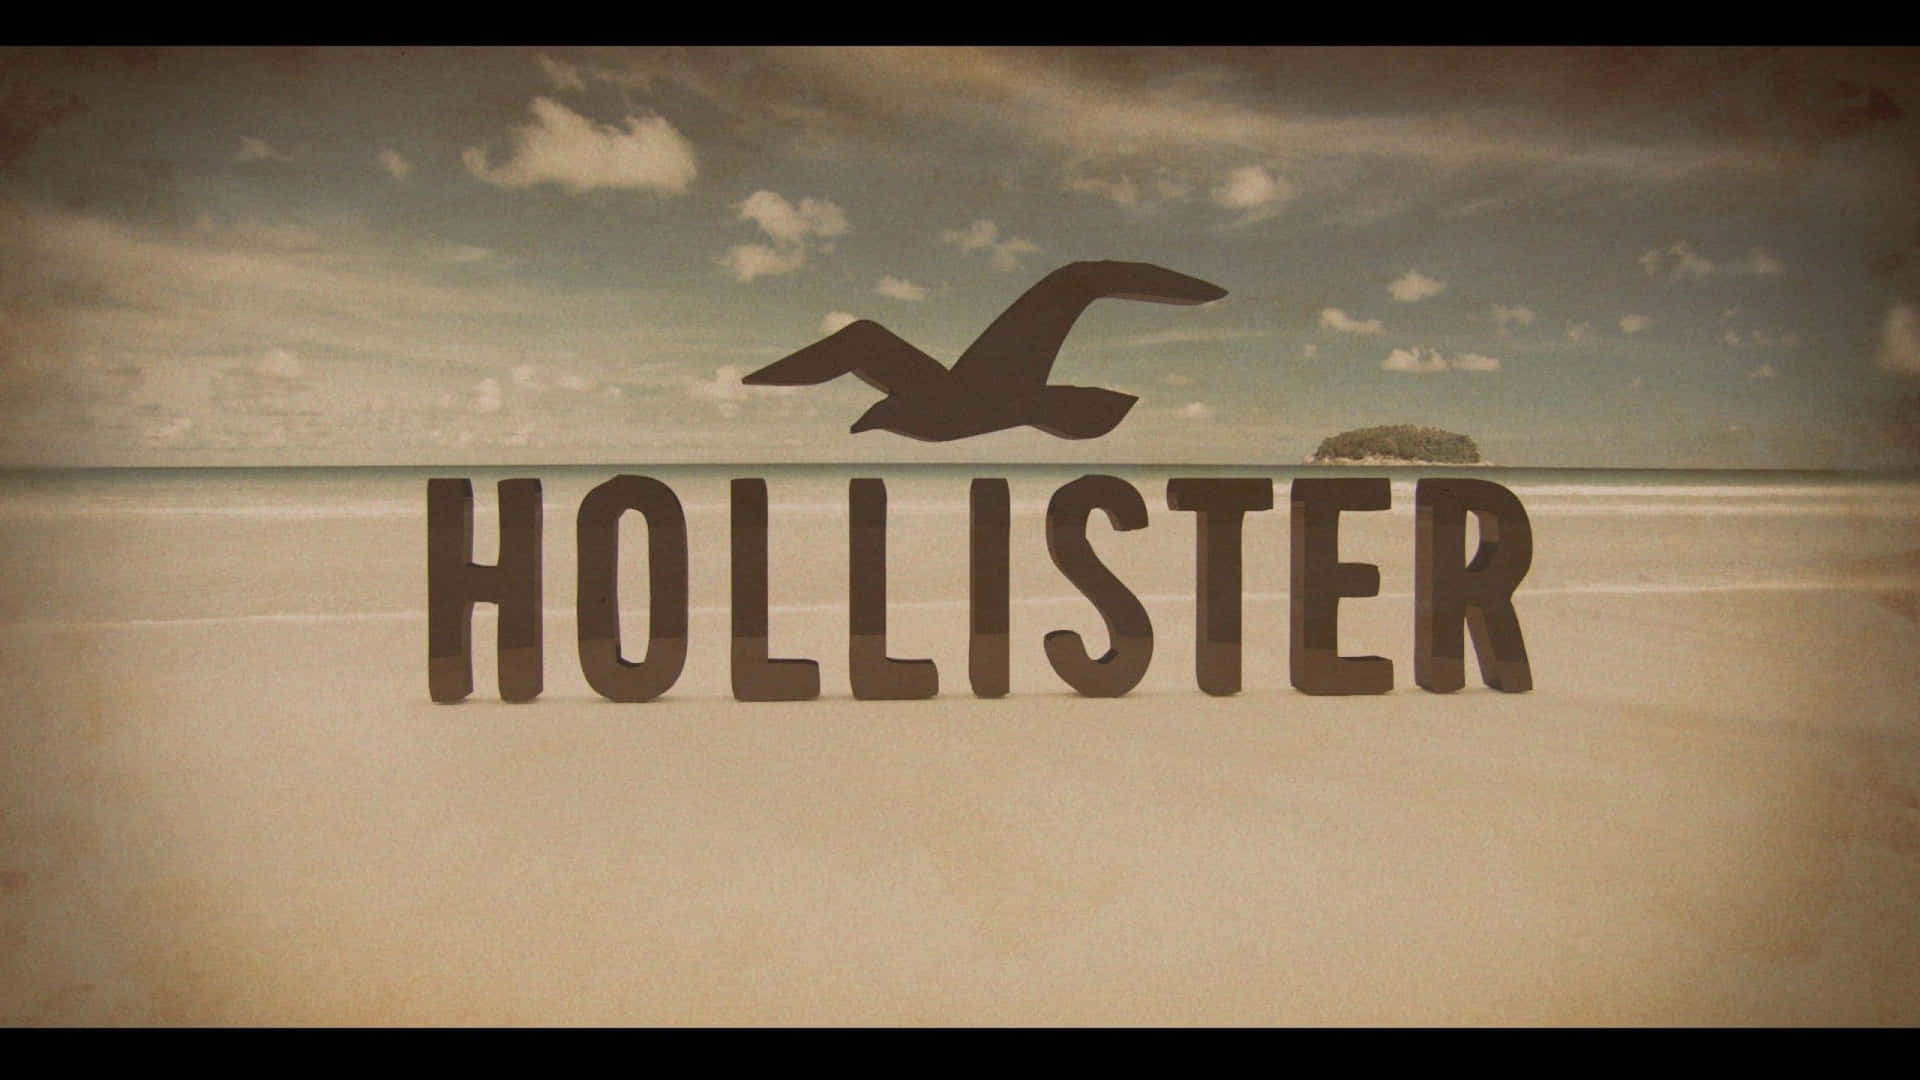 Hollister Logo On A Beach With A Bird In The Background